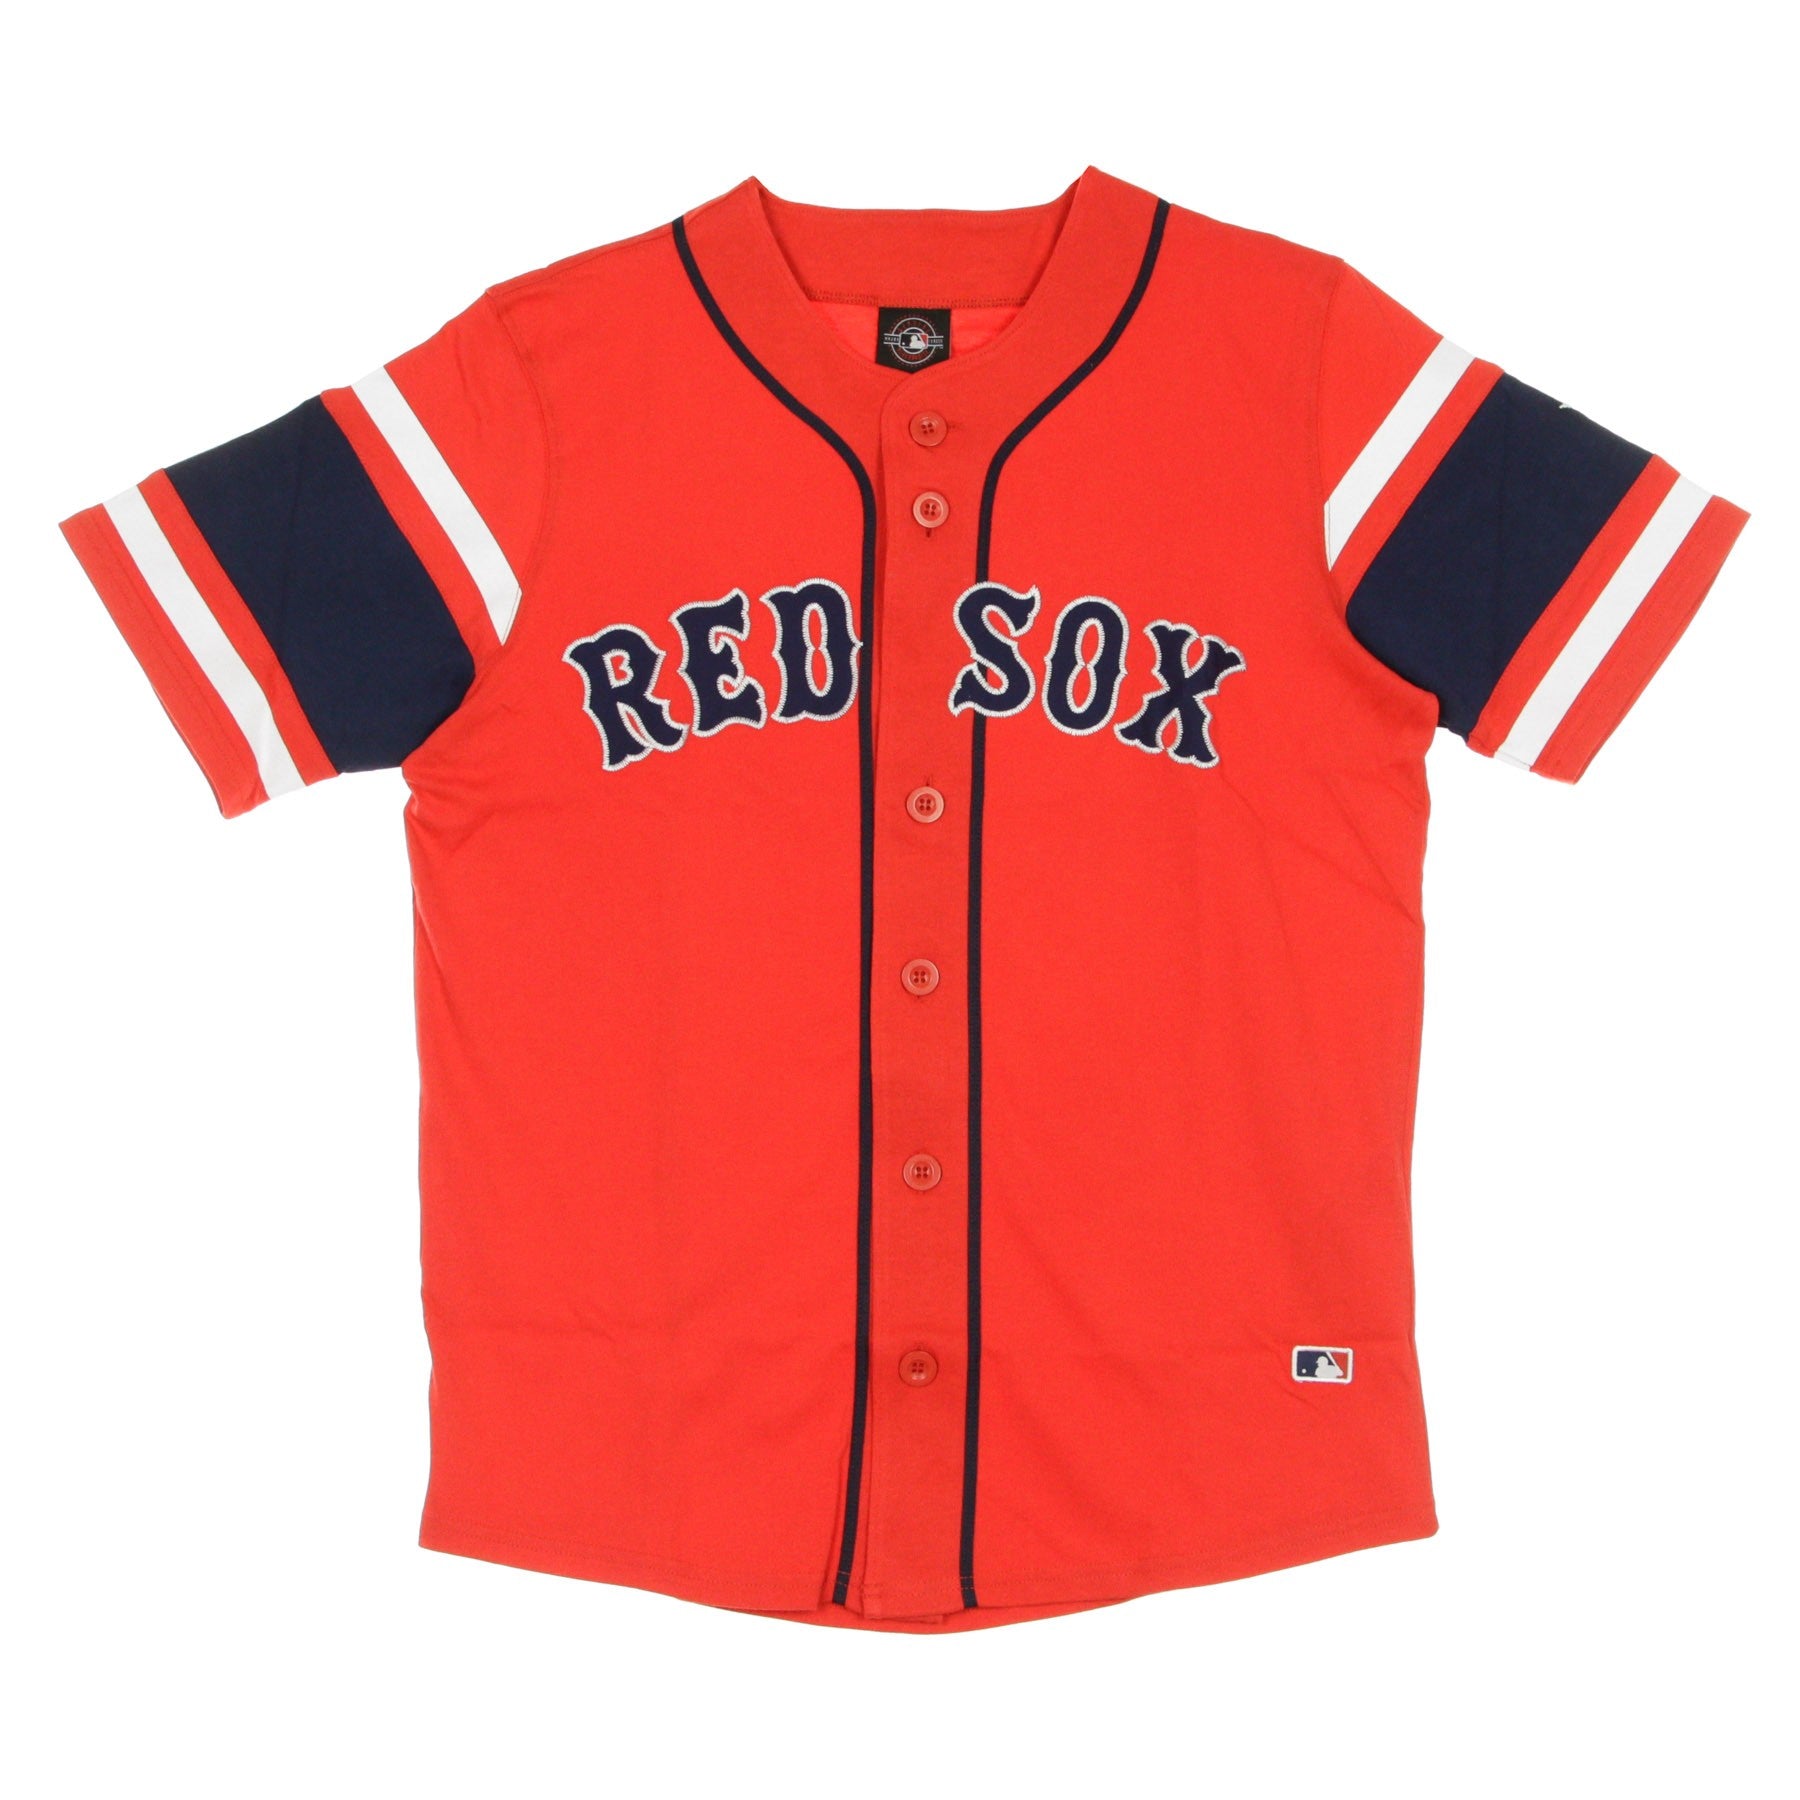 Men's Buttons Jacket Mlb Franchise Cotton Supporters Jersey Bosred Original Team Colors